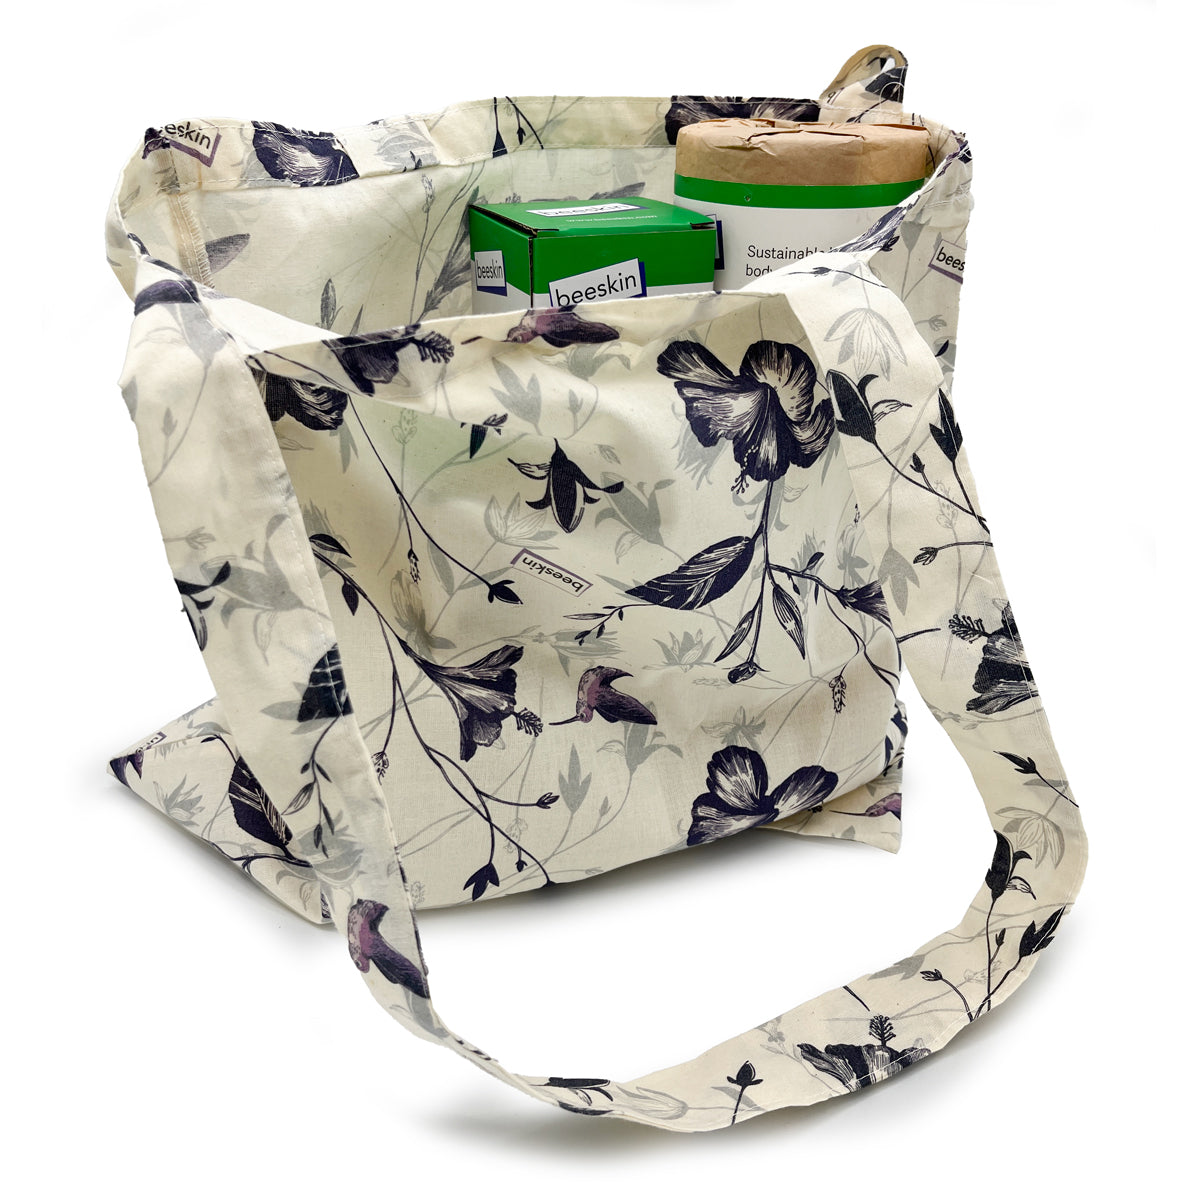 beeskin cotton shopping bag hummingbird carrying tea infuser and bamboo roll